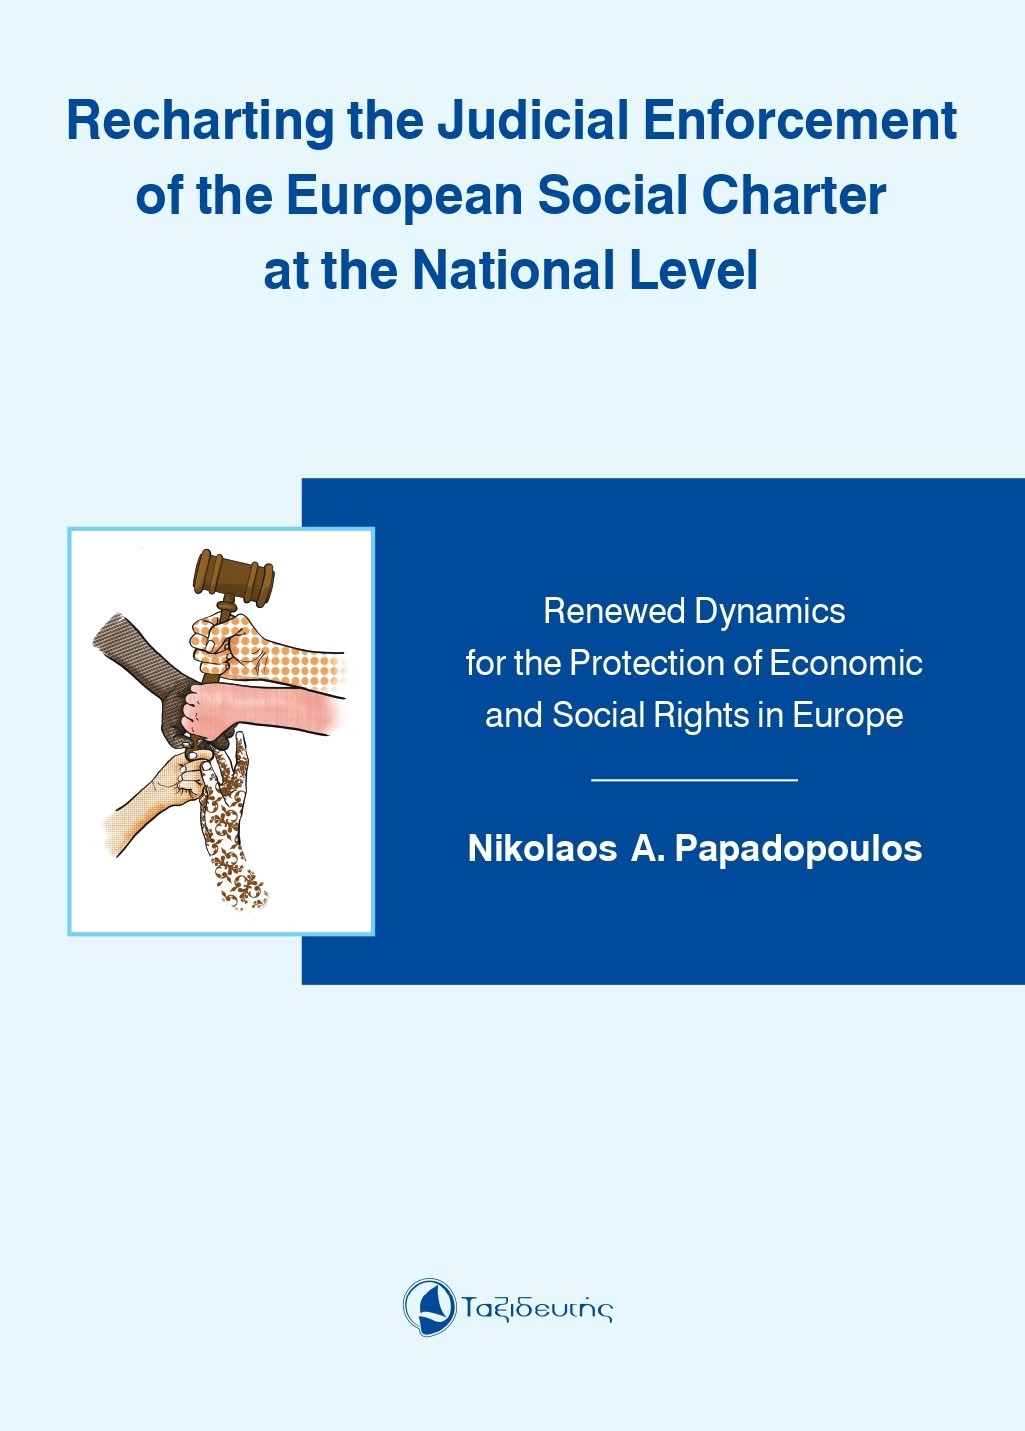 Recharting the Judicial Enforcement of the European Social Charter at the National Level